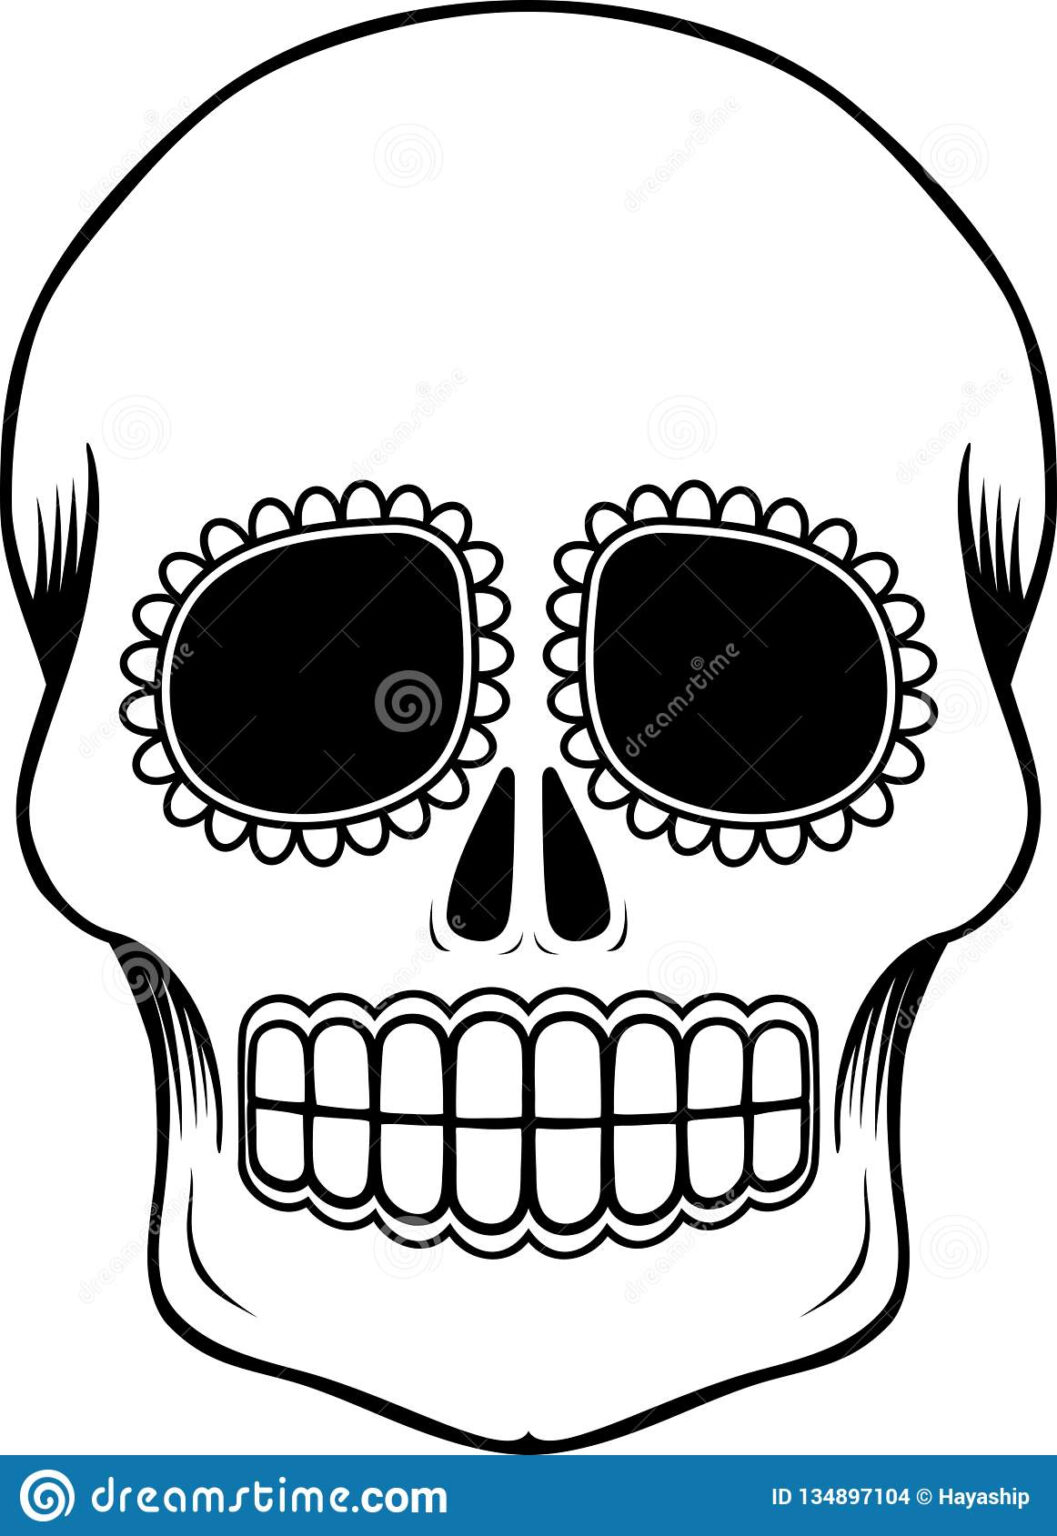 mexican-sugar-skull-template-stock-vector-illustration-of-with-blank